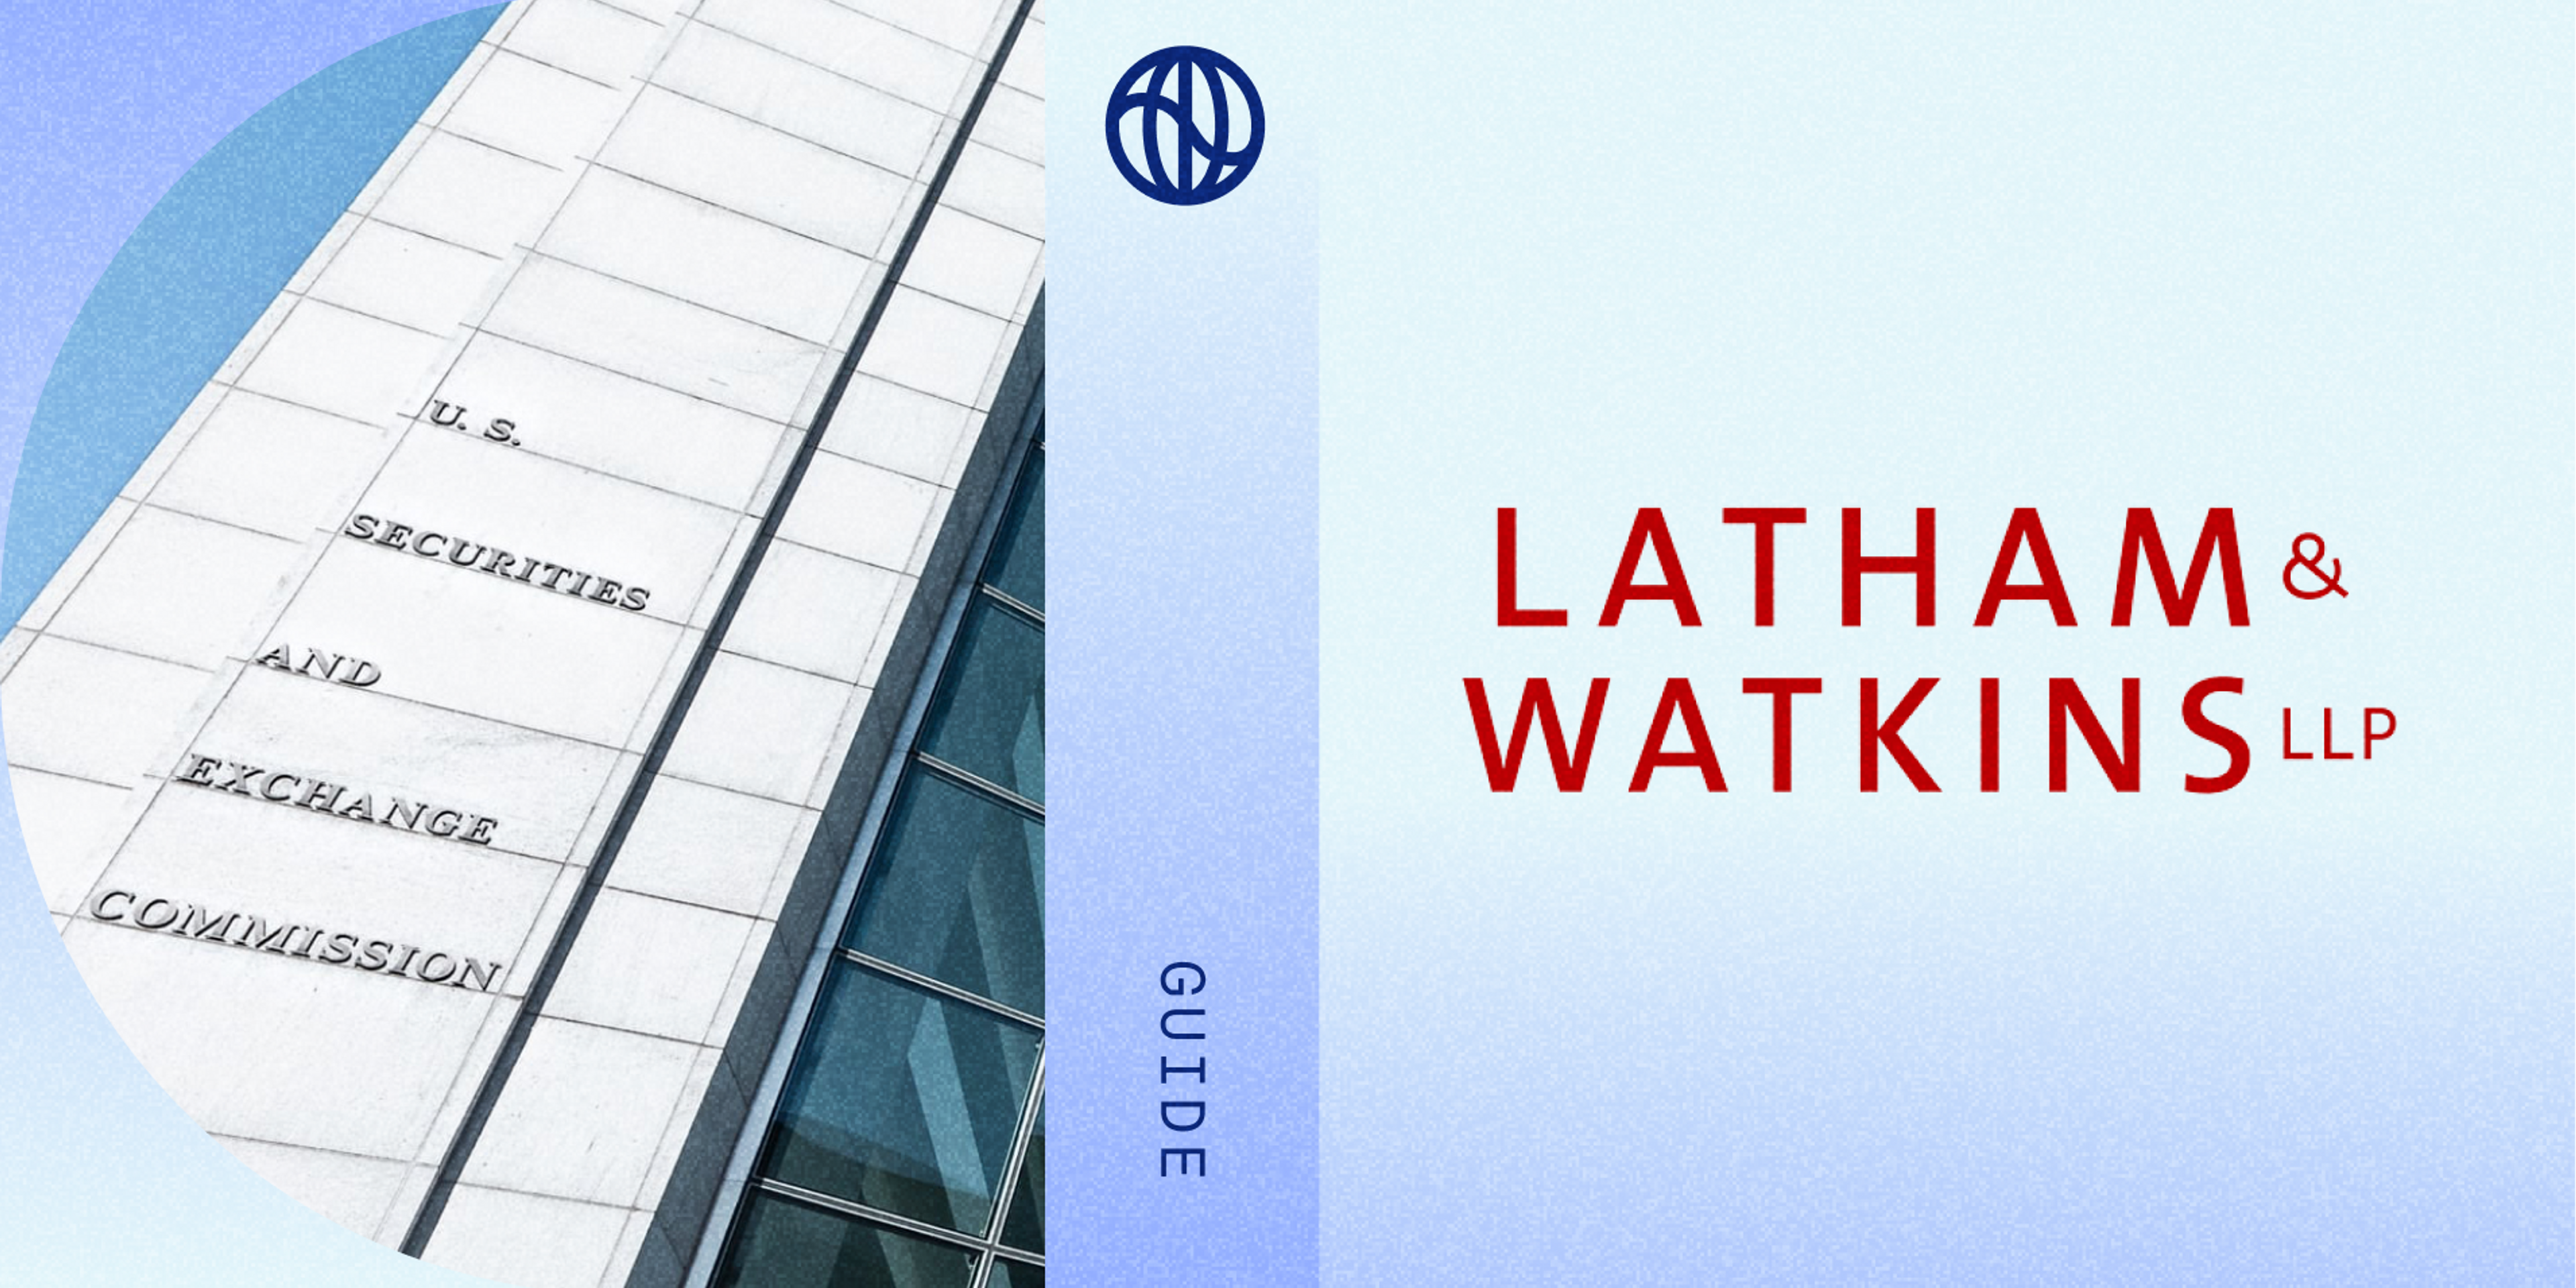 watershed and latham and watkins law firm logos next to an image of the SEC